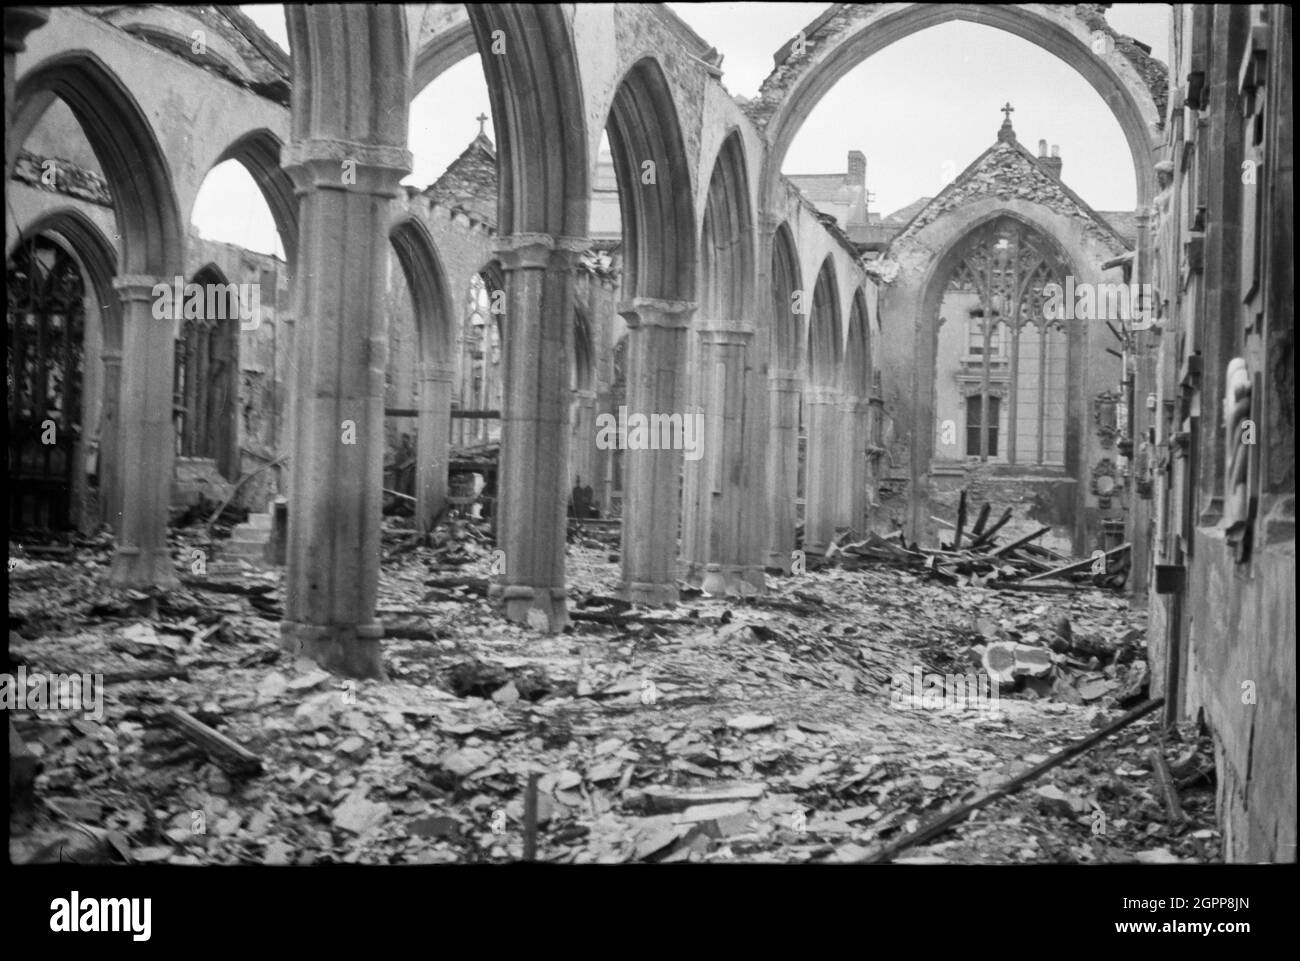 St Andrew's Church, Catherine Street, Plymouth, 1941. Interior view of the south aisle of St Andrew's Church, showing bomb damage. Stock Photo